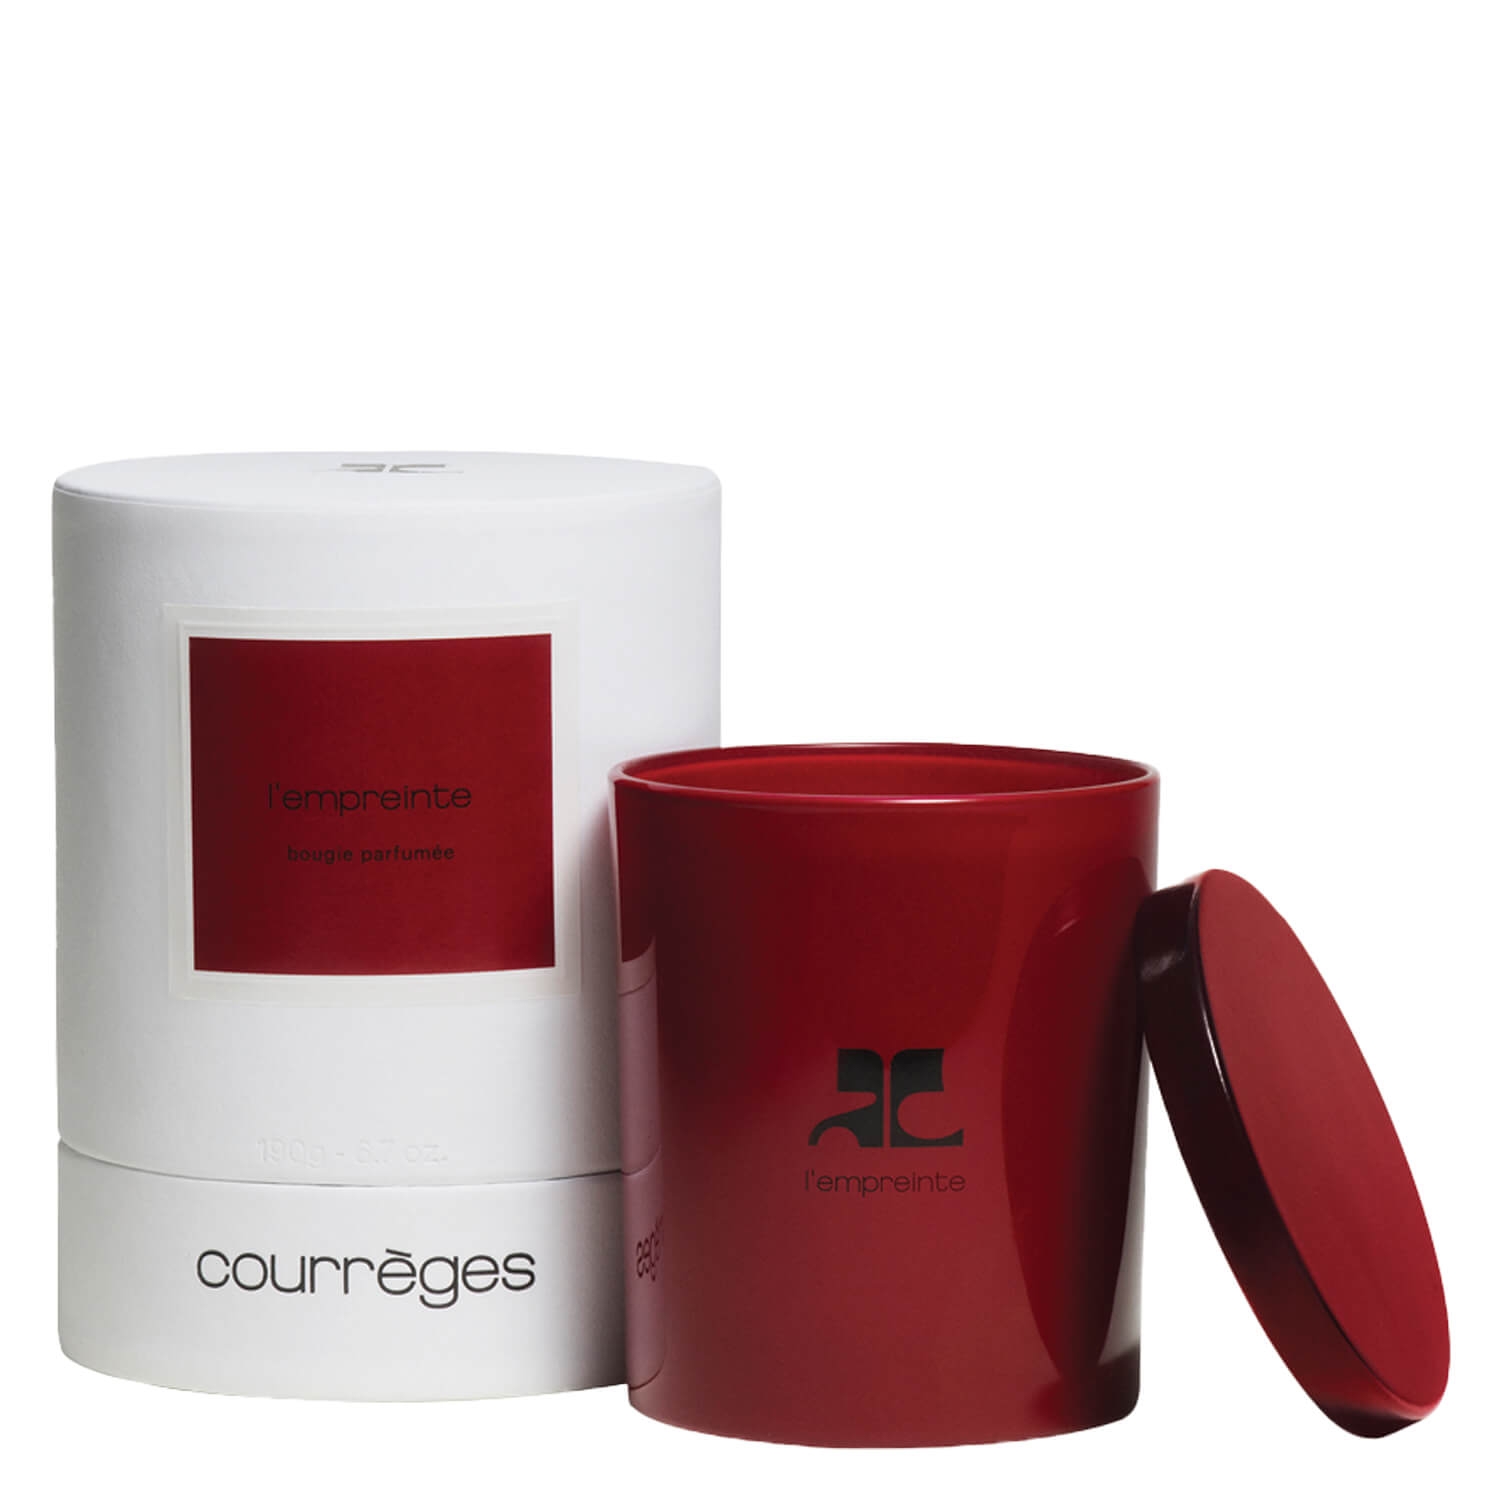 Product image from courrèges - l'empreinte candle